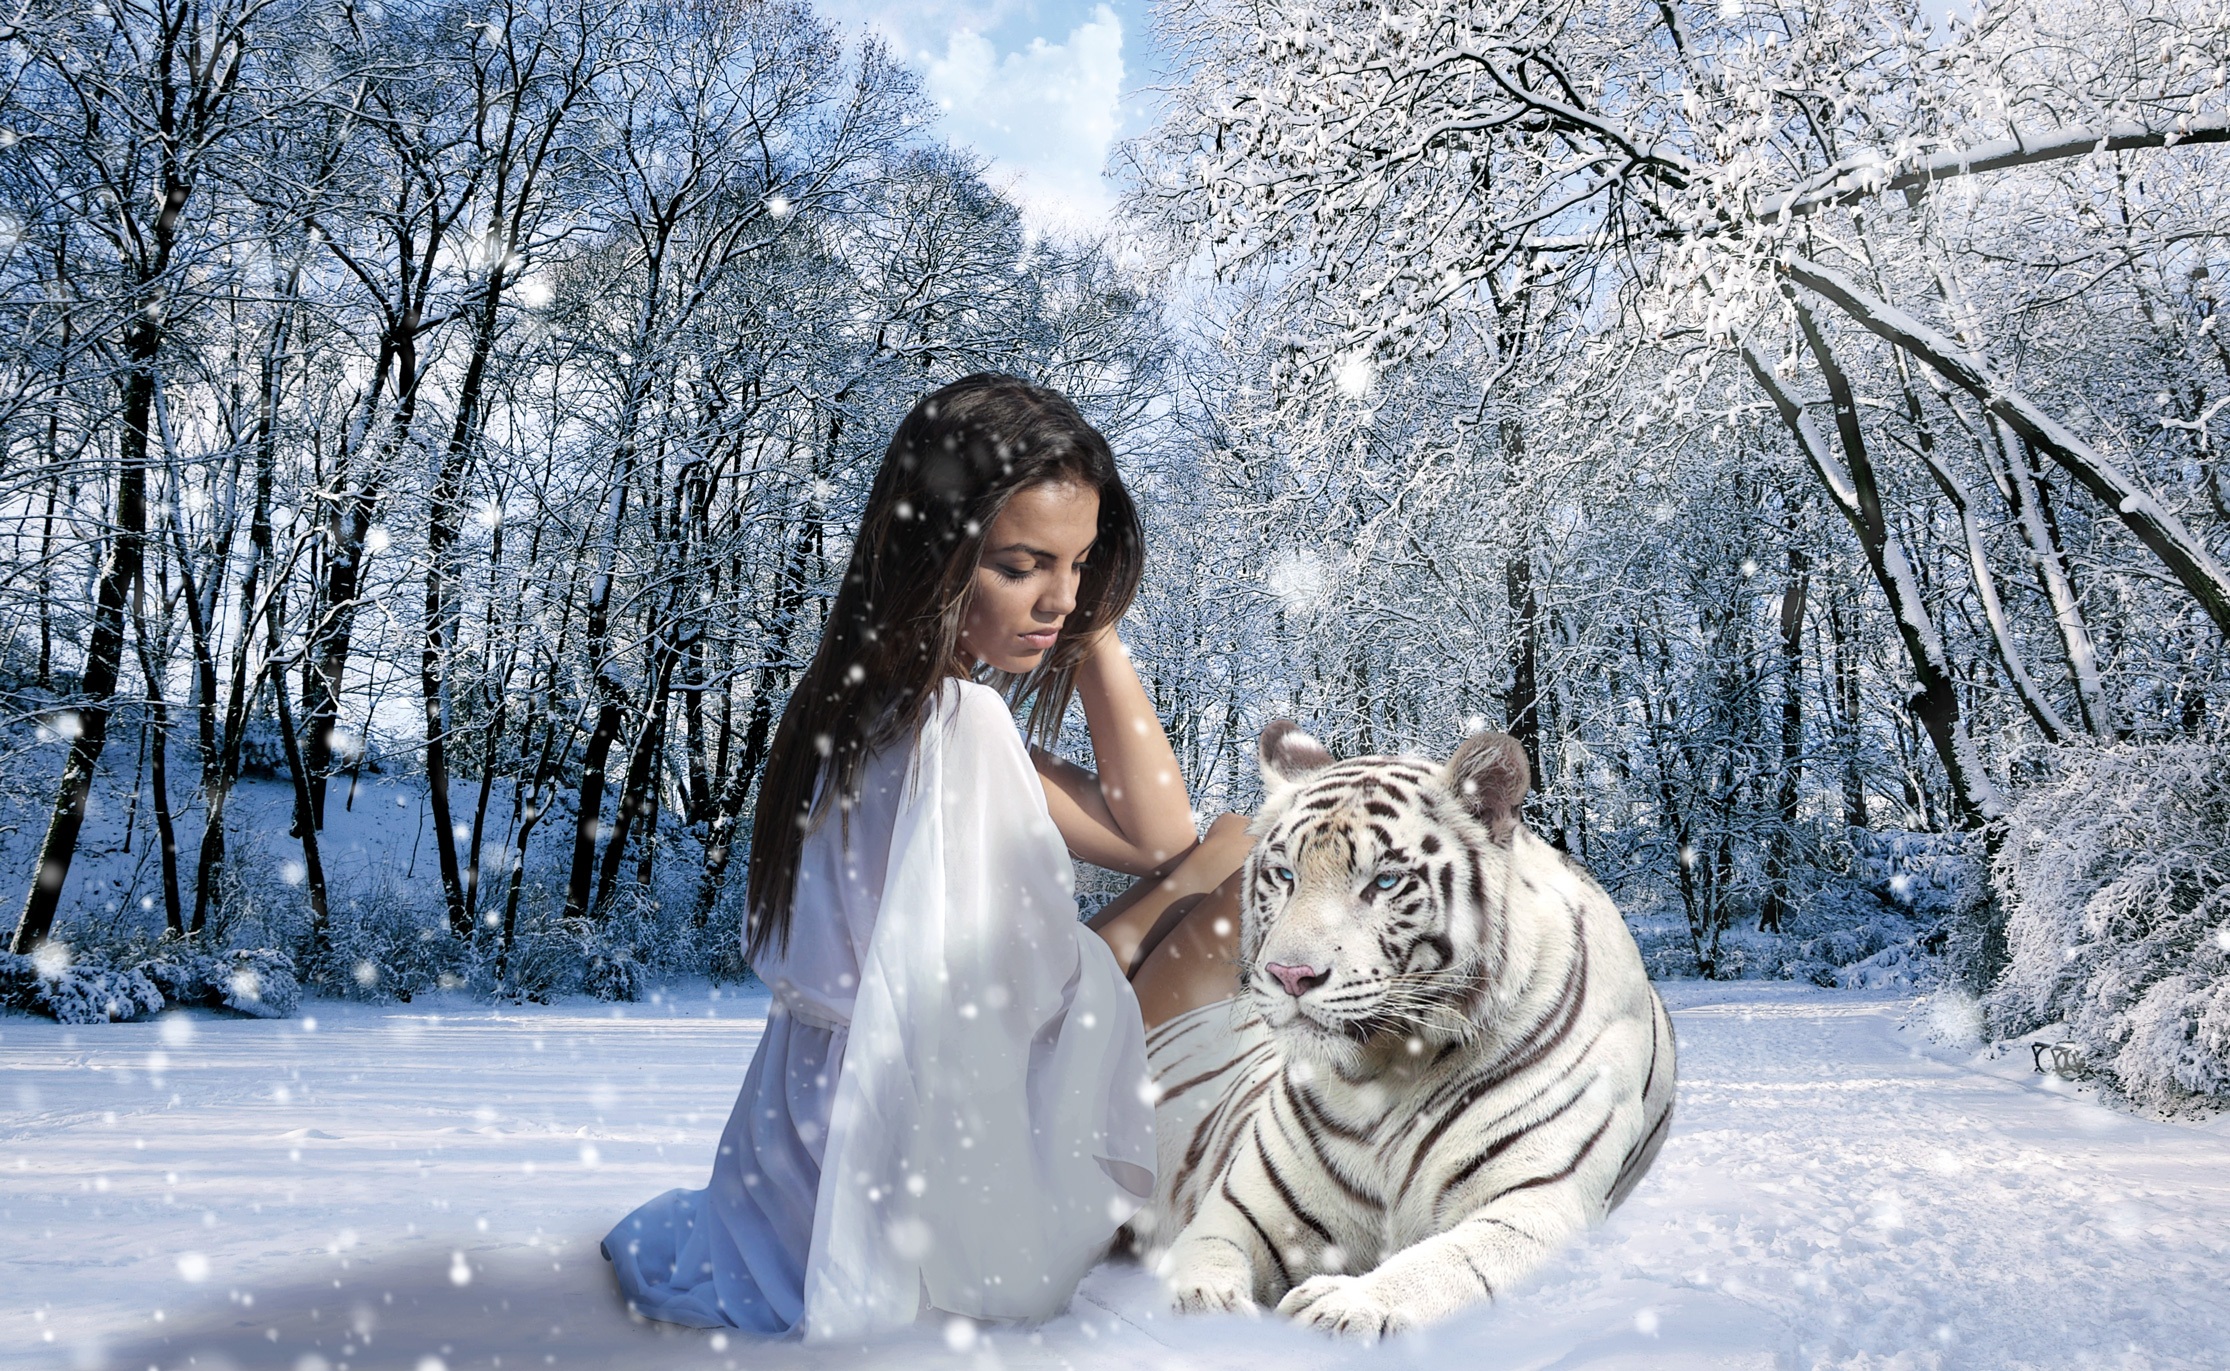 Free Image, nature, forest, snow, winter, woman, spring, weather, season, trees, background, tiger, look, wallpaper, plan, imagination, processing, feelings, freezing 2230x1371